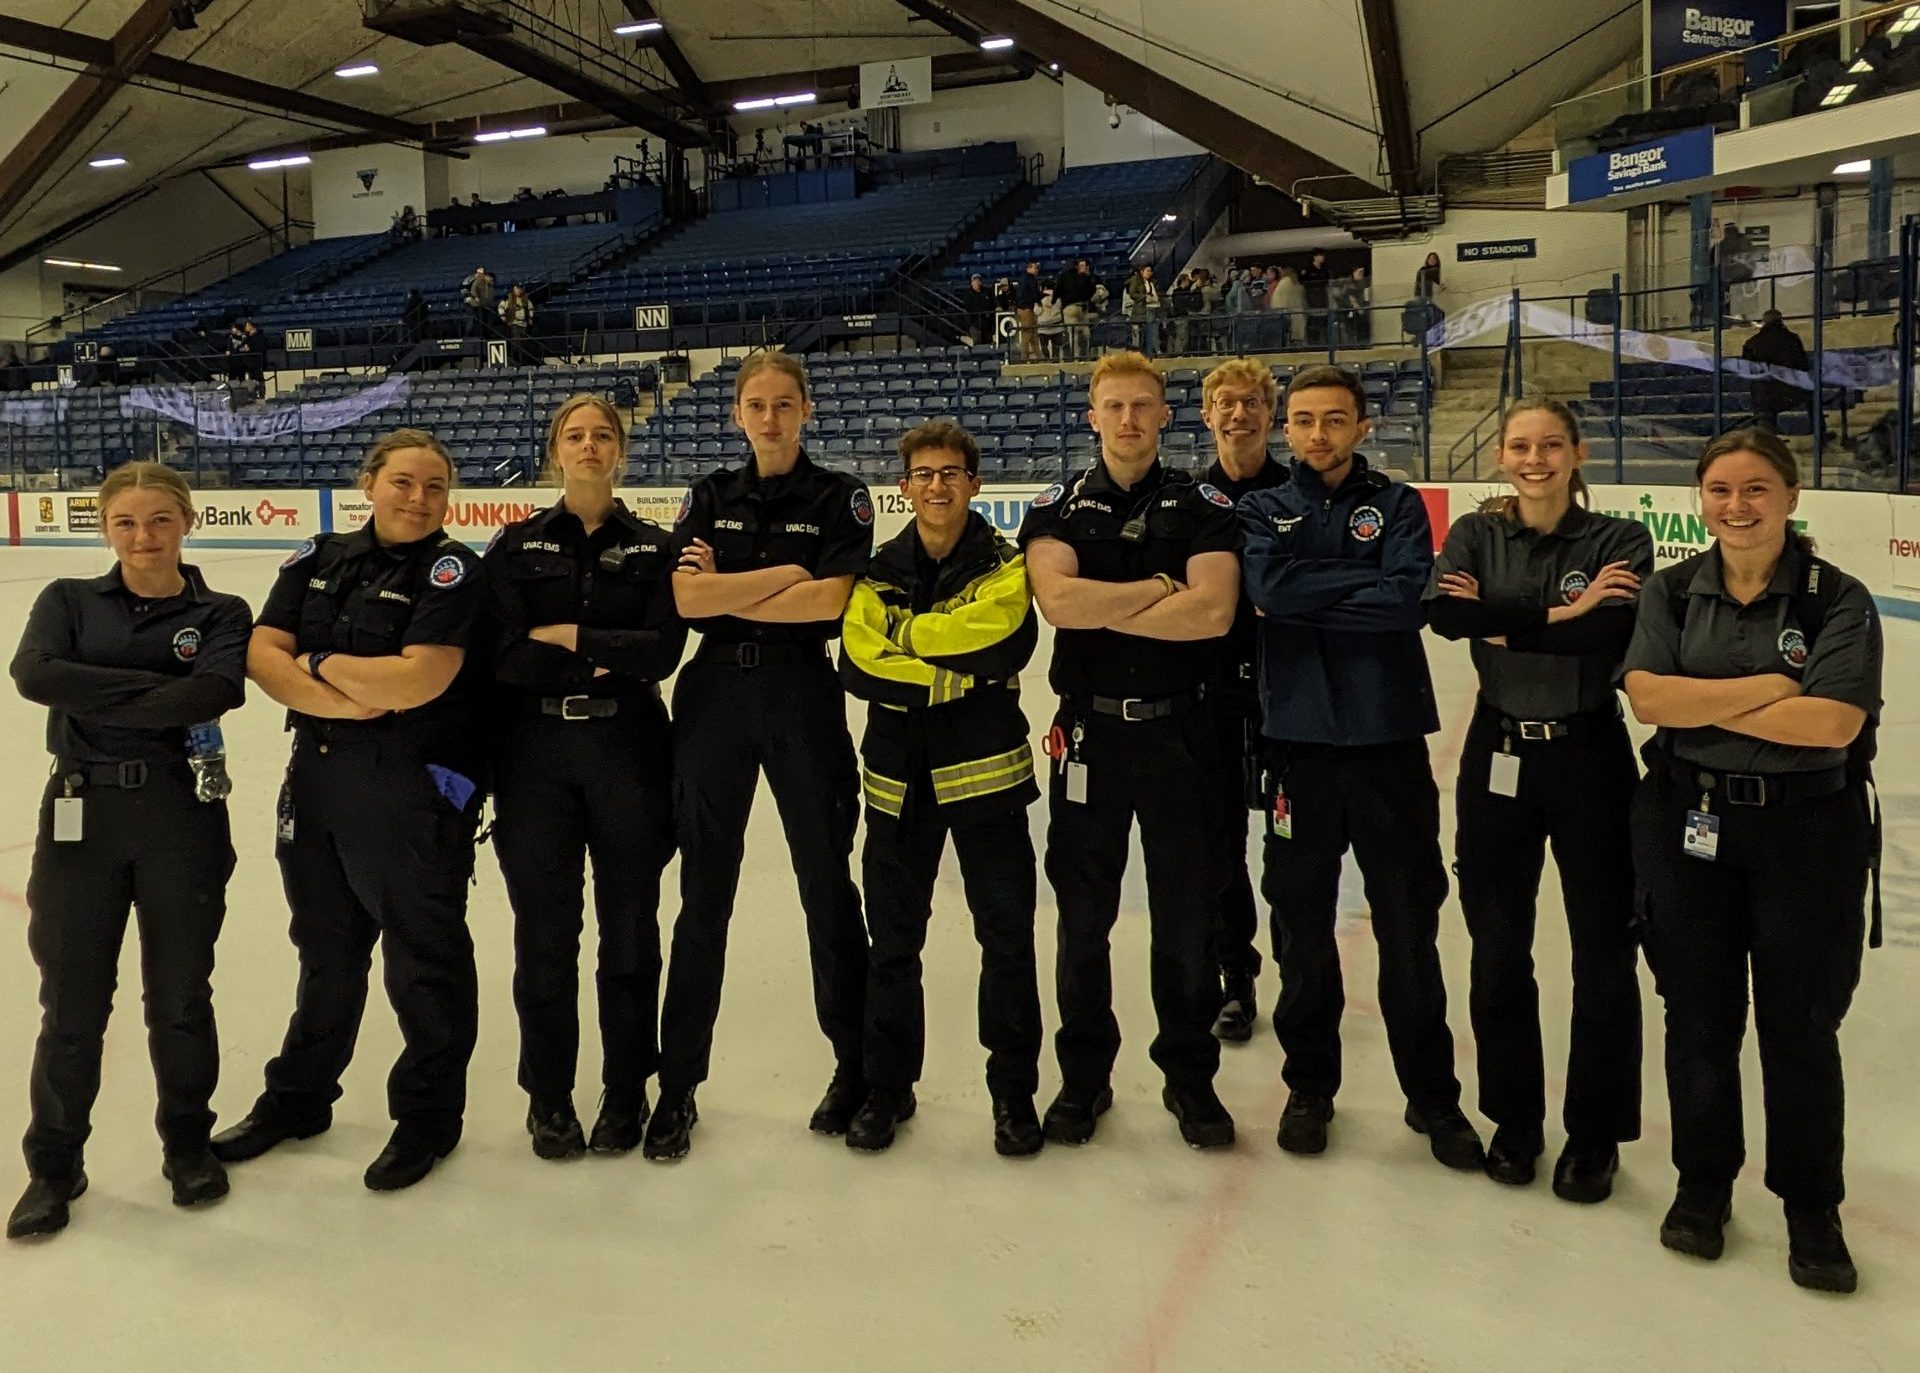 UVAC Members stand in a line for a photo on the Alfond Arena ice rink.